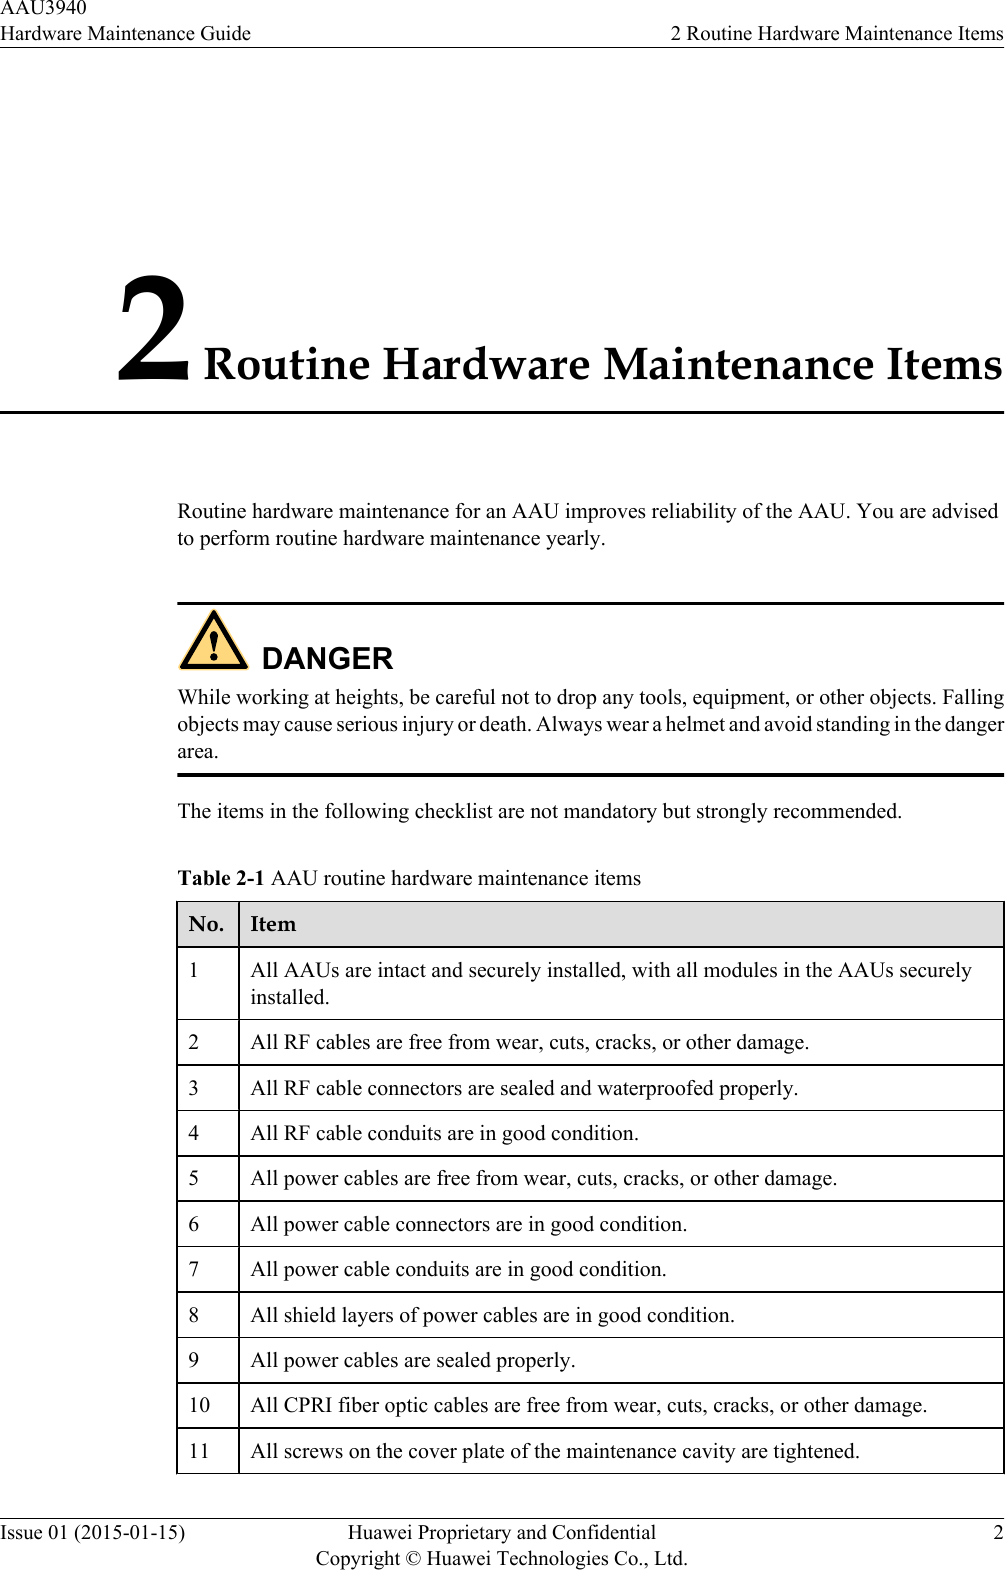 2 Routine Hardware Maintenance ItemsRoutine hardware maintenance for an AAU improves reliability of the AAU. You are advisedto perform routine hardware maintenance yearly.DANGERWhile working at heights, be careful not to drop any tools, equipment, or other objects. Fallingobjects may cause serious injury or death. Always wear a helmet and avoid standing in the dangerarea.The items in the following checklist are not mandatory but strongly recommended.Table 2-1 AAU routine hardware maintenance itemsNo. Item1All AAUs are intact and securely installed, with all modules in the AAUs securelyinstalled.2 All RF cables are free from wear, cuts, cracks, or other damage.3 All RF cable connectors are sealed and waterproofed properly.4 All RF cable conduits are in good condition.5 All power cables are free from wear, cuts, cracks, or other damage.6 All power cable connectors are in good condition.7 All power cable conduits are in good condition.8 All shield layers of power cables are in good condition.9 All power cables are sealed properly.10 All CPRI fiber optic cables are free from wear, cuts, cracks, or other damage.11 All screws on the cover plate of the maintenance cavity are tightened.AAU3940Hardware Maintenance Guide 2 Routine Hardware Maintenance ItemsIssue 01 (2015-01-15) Huawei Proprietary and ConfidentialCopyright © Huawei Technologies Co., Ltd.2